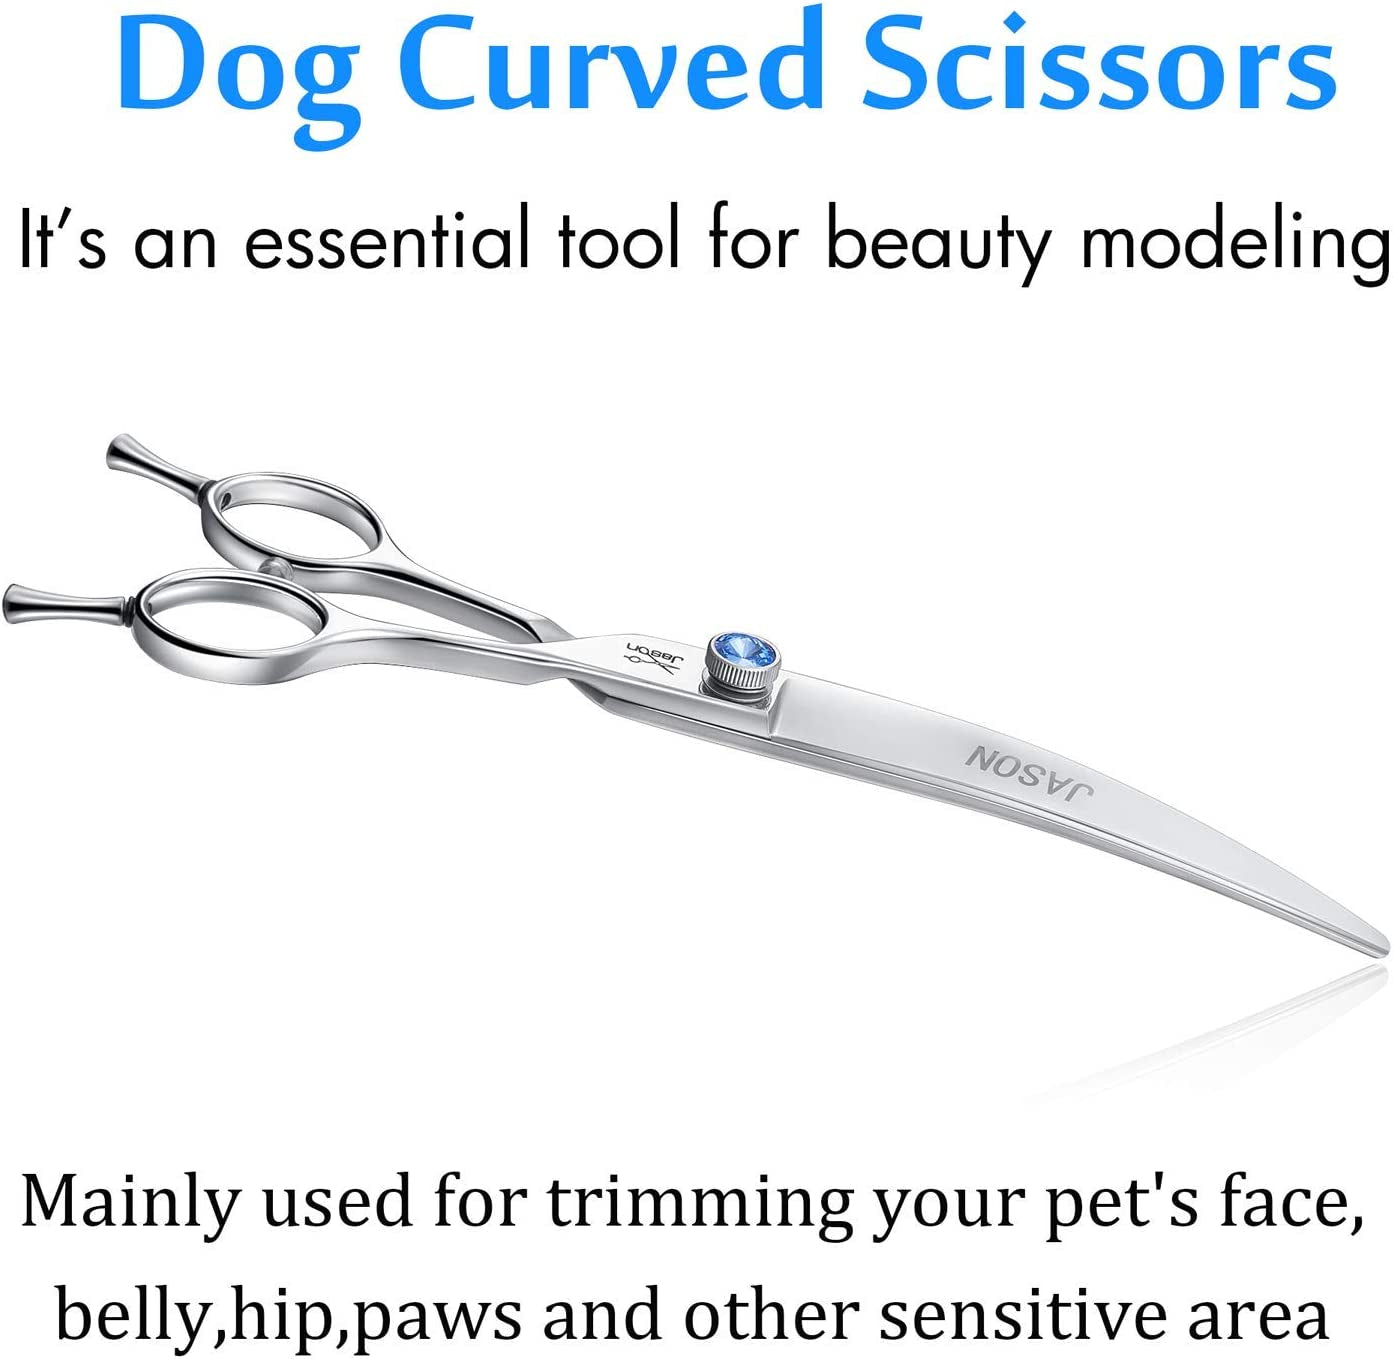 7" Curved Dog Grooming Scissors, Ergonomic Pets Cats Trimming Shears with Offset Handle and a Jewelled Screw for Right Handed Groomers, Sharp, Comfortable, Light-Weight